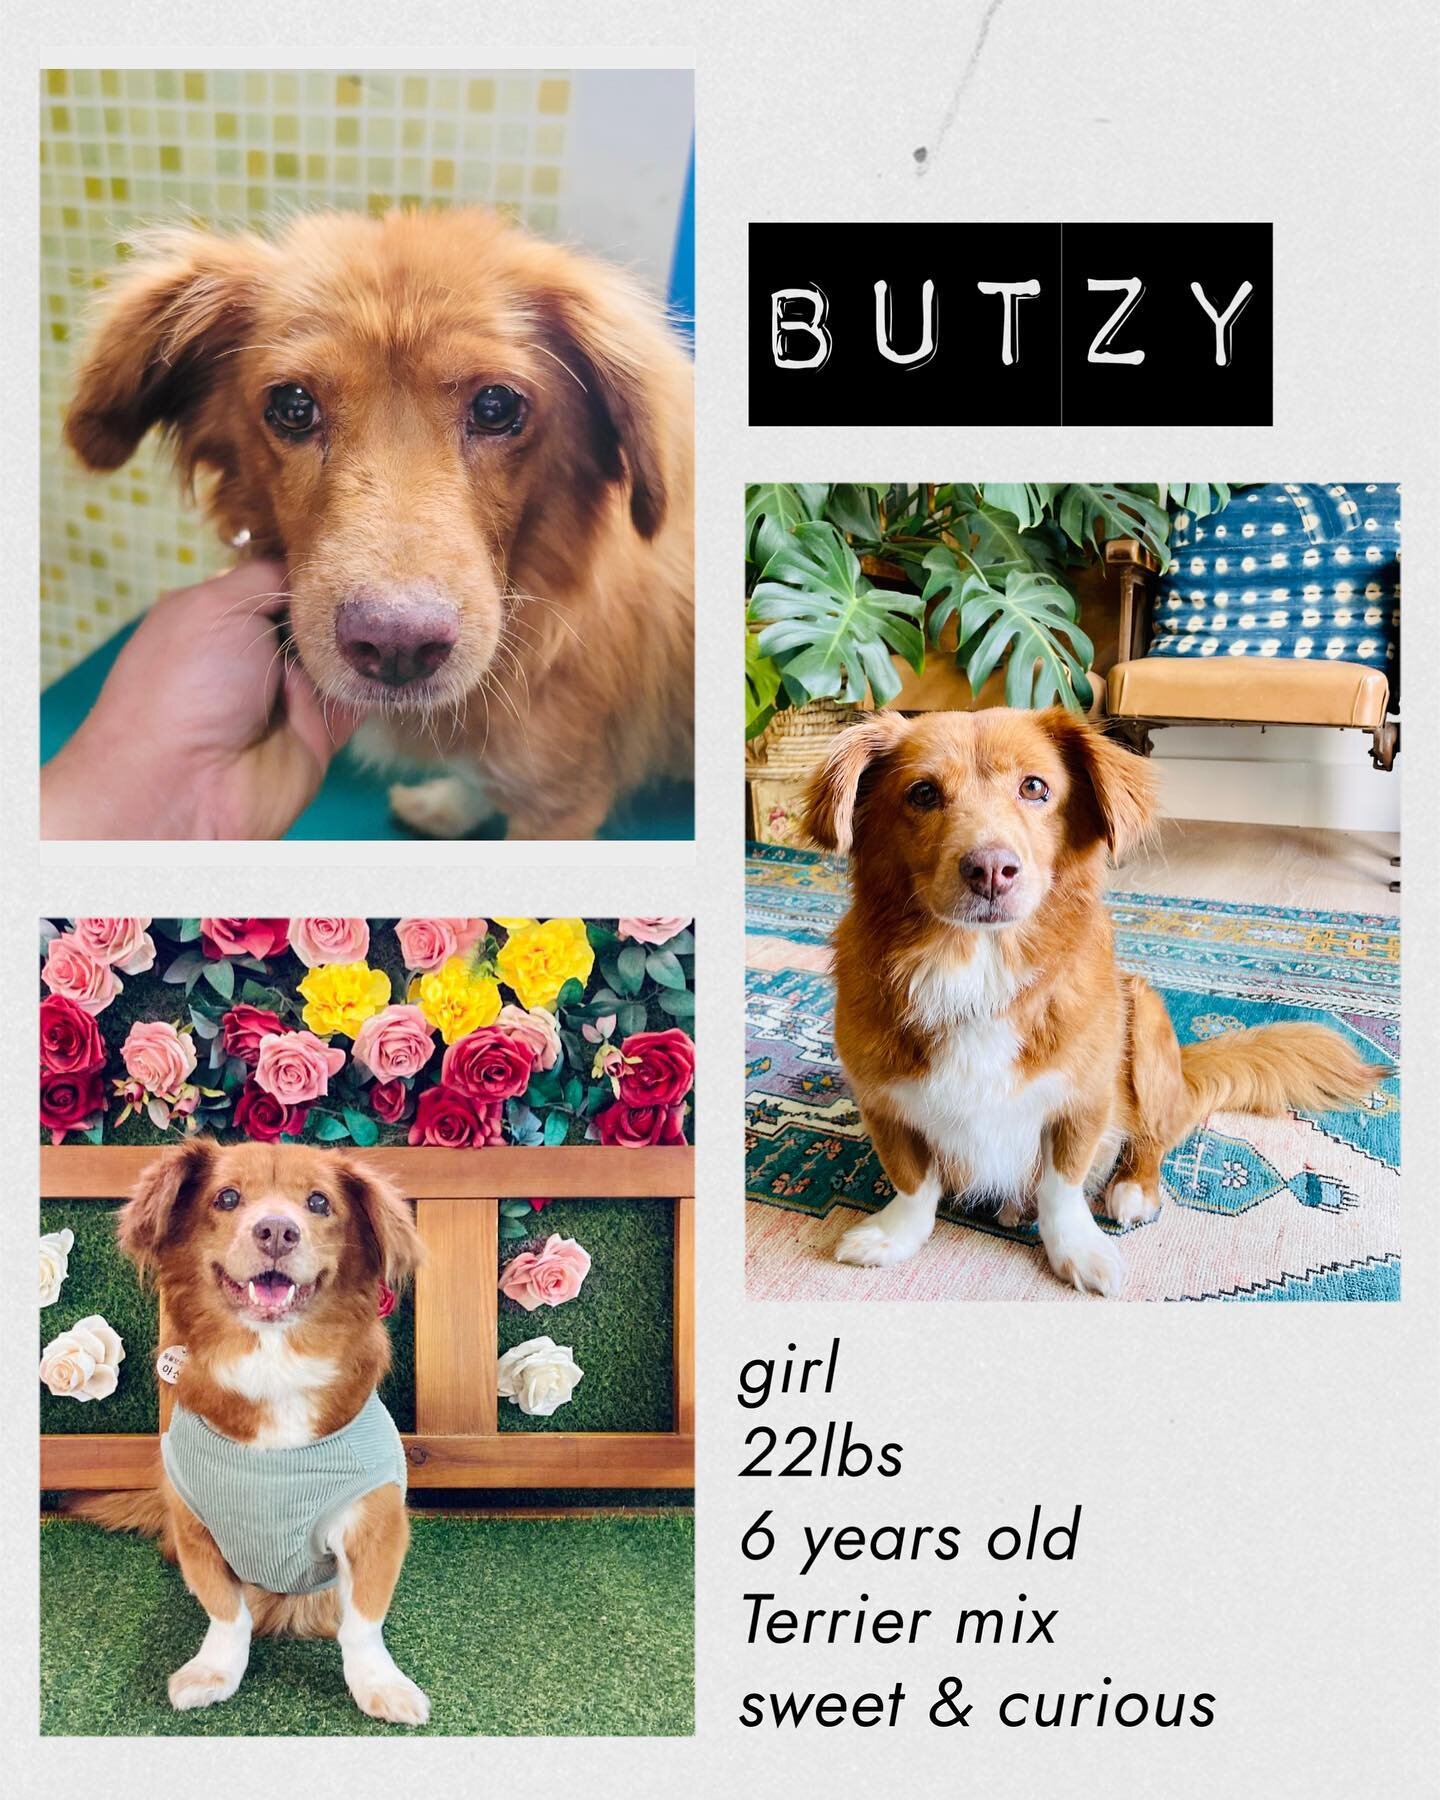 In August of 2021 Butzy (aka Boots) was found wandering the streets near Asan, South Korea all by herself. She had a collar on, but no tags, and was brought to the local high-kill pound where she was confined to a small cage for two months waiting fo